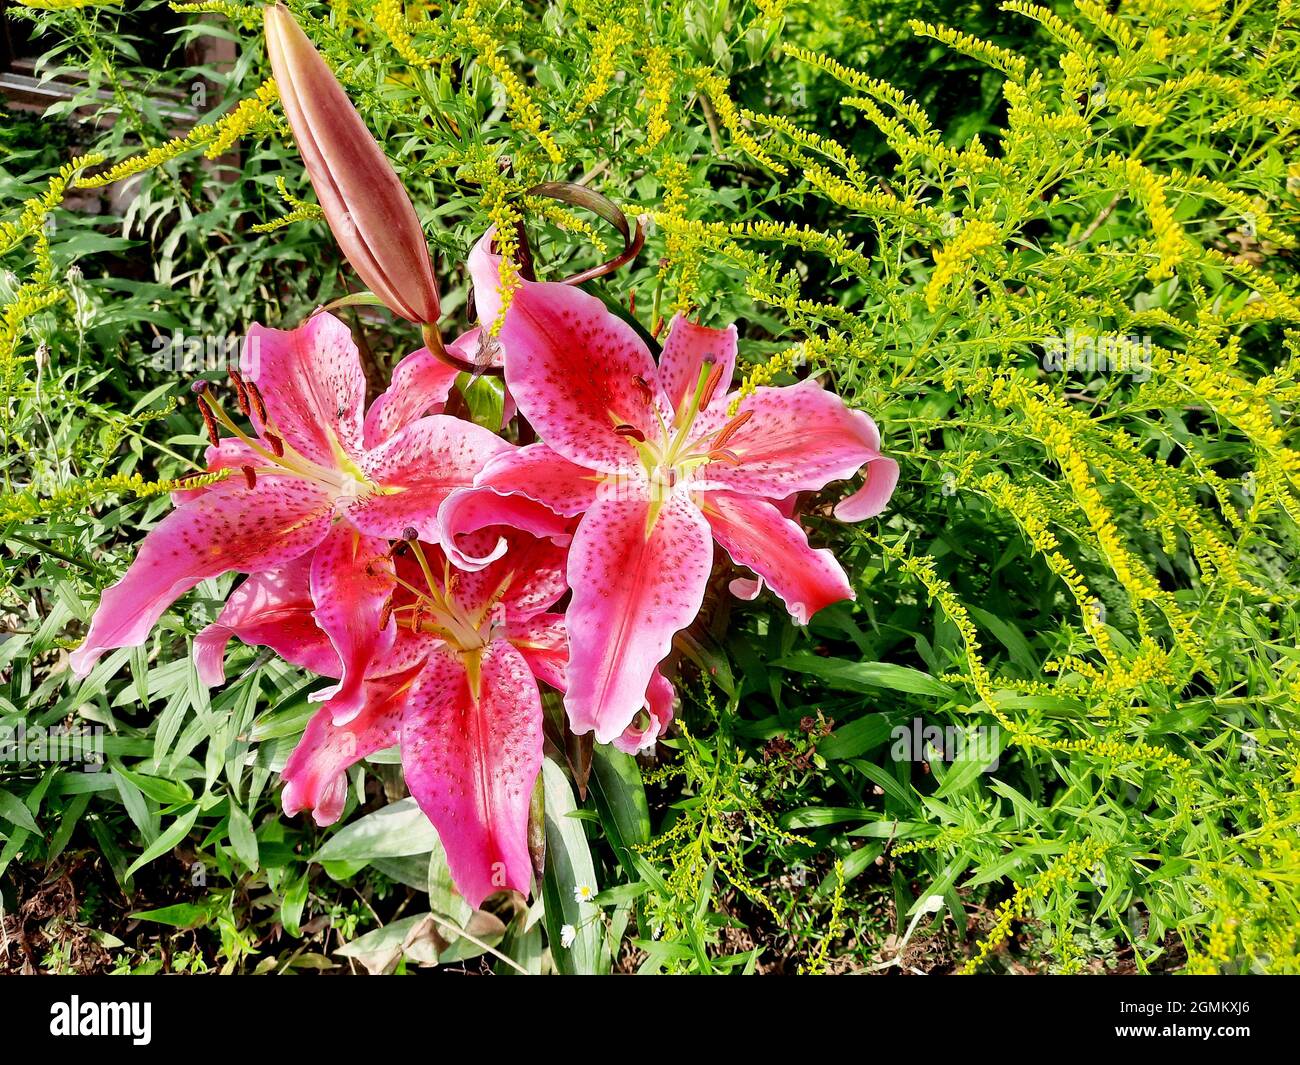 Oriental lily, flowering plant, behind it Canadian goldenrod (Silidago canadiensis) Stock Photo